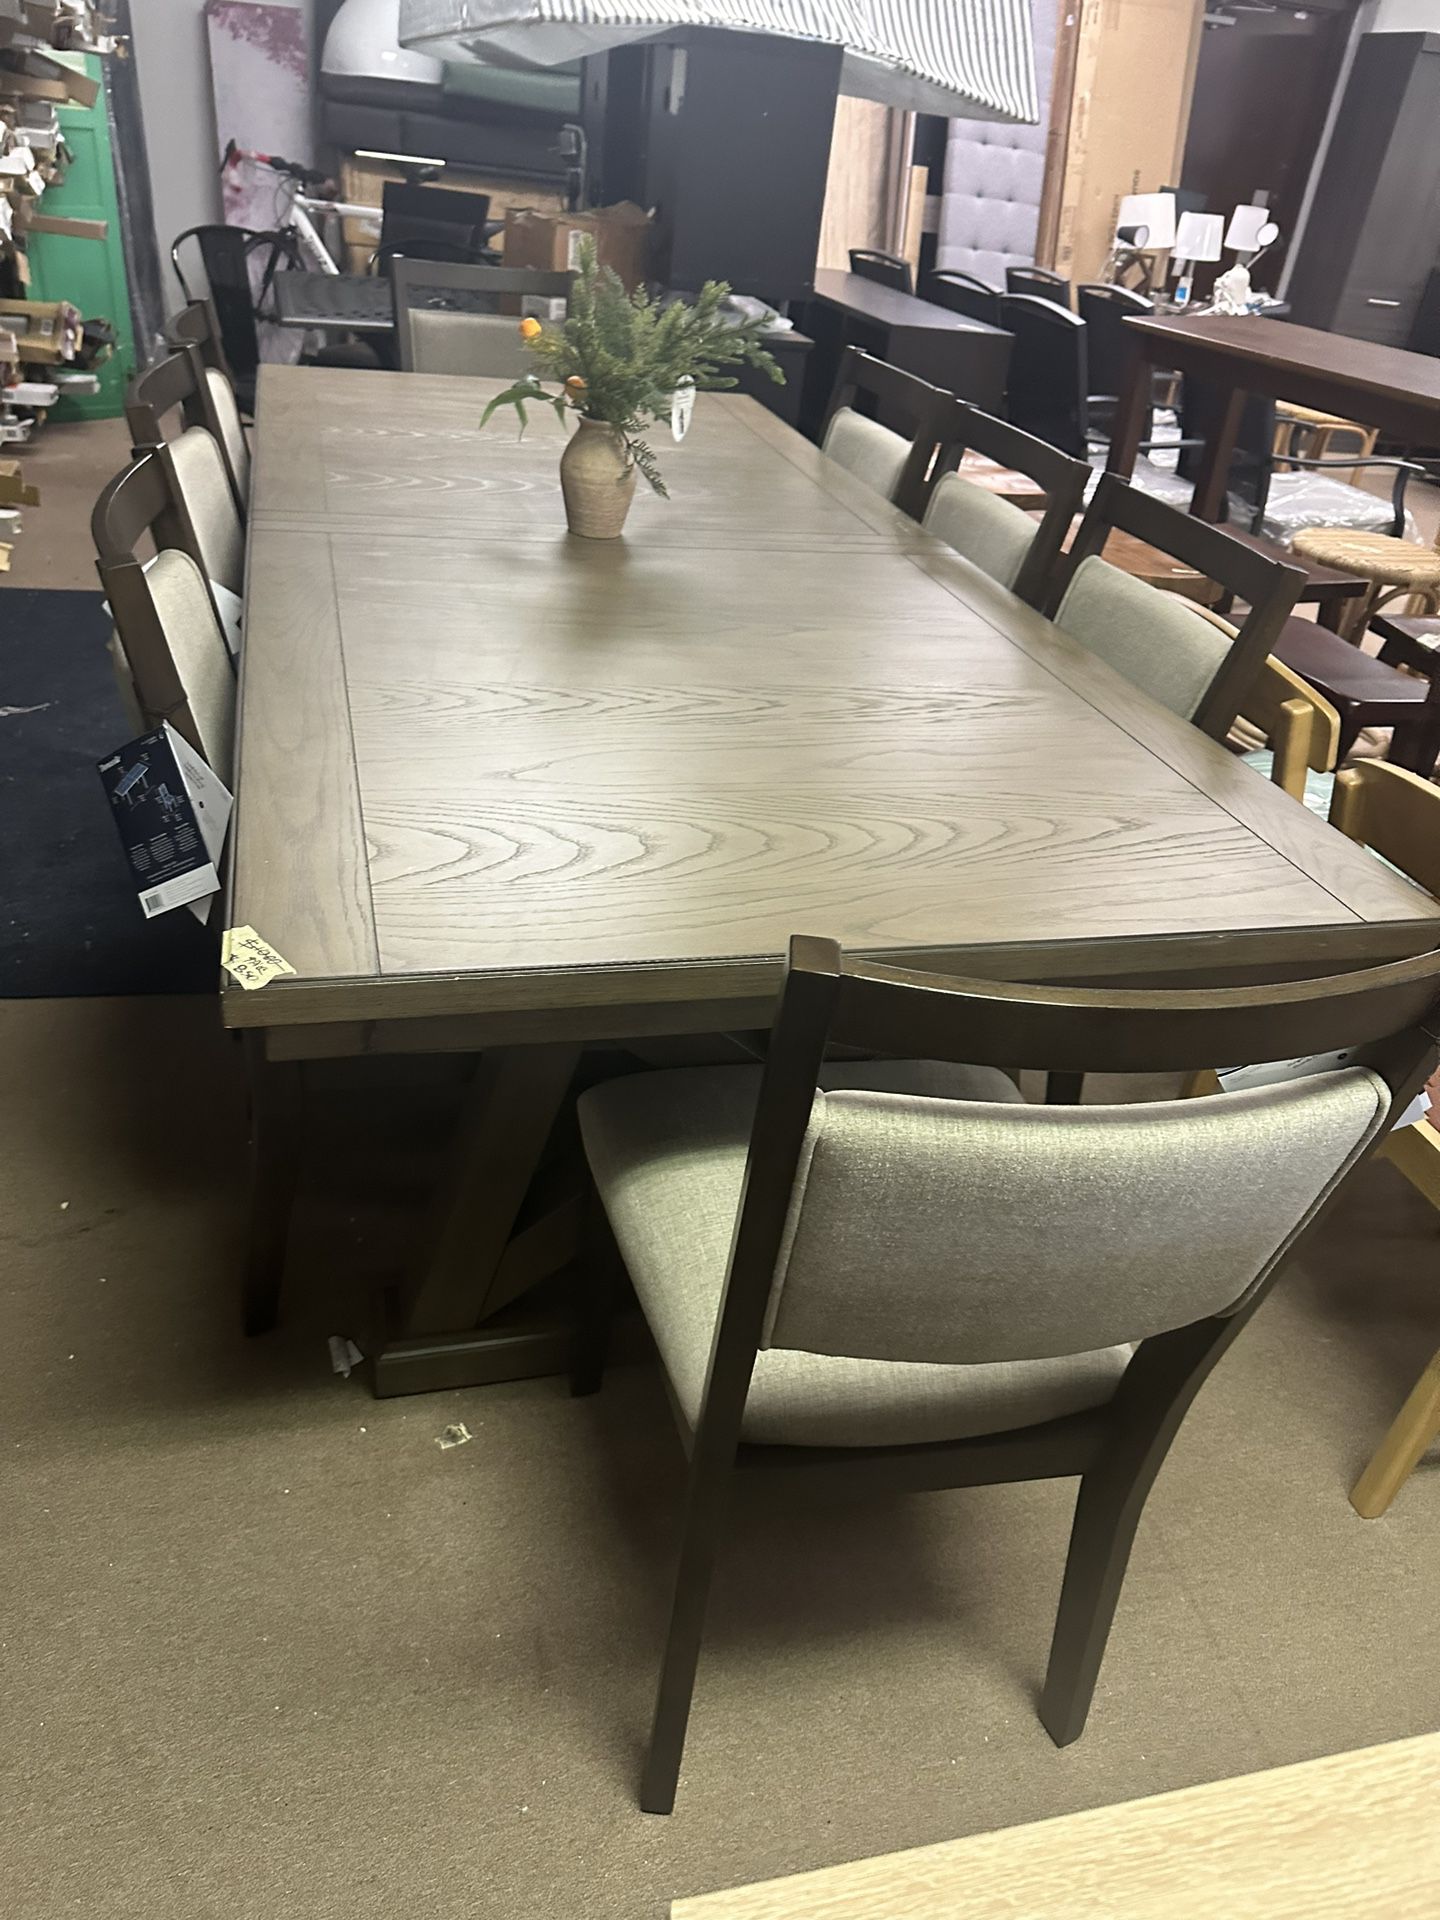 Dining table retail $1700 Costco